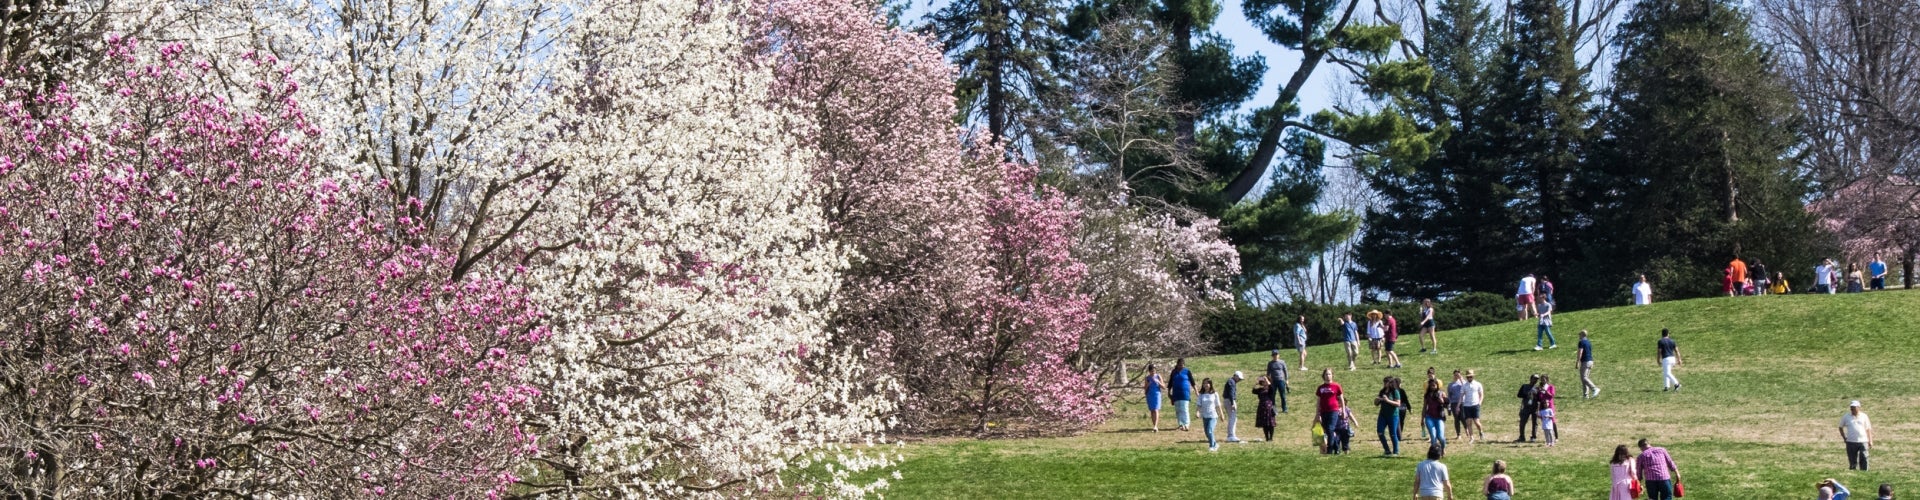 A large group of people walk around on a green hill surrounded by pink and white flowering trees.